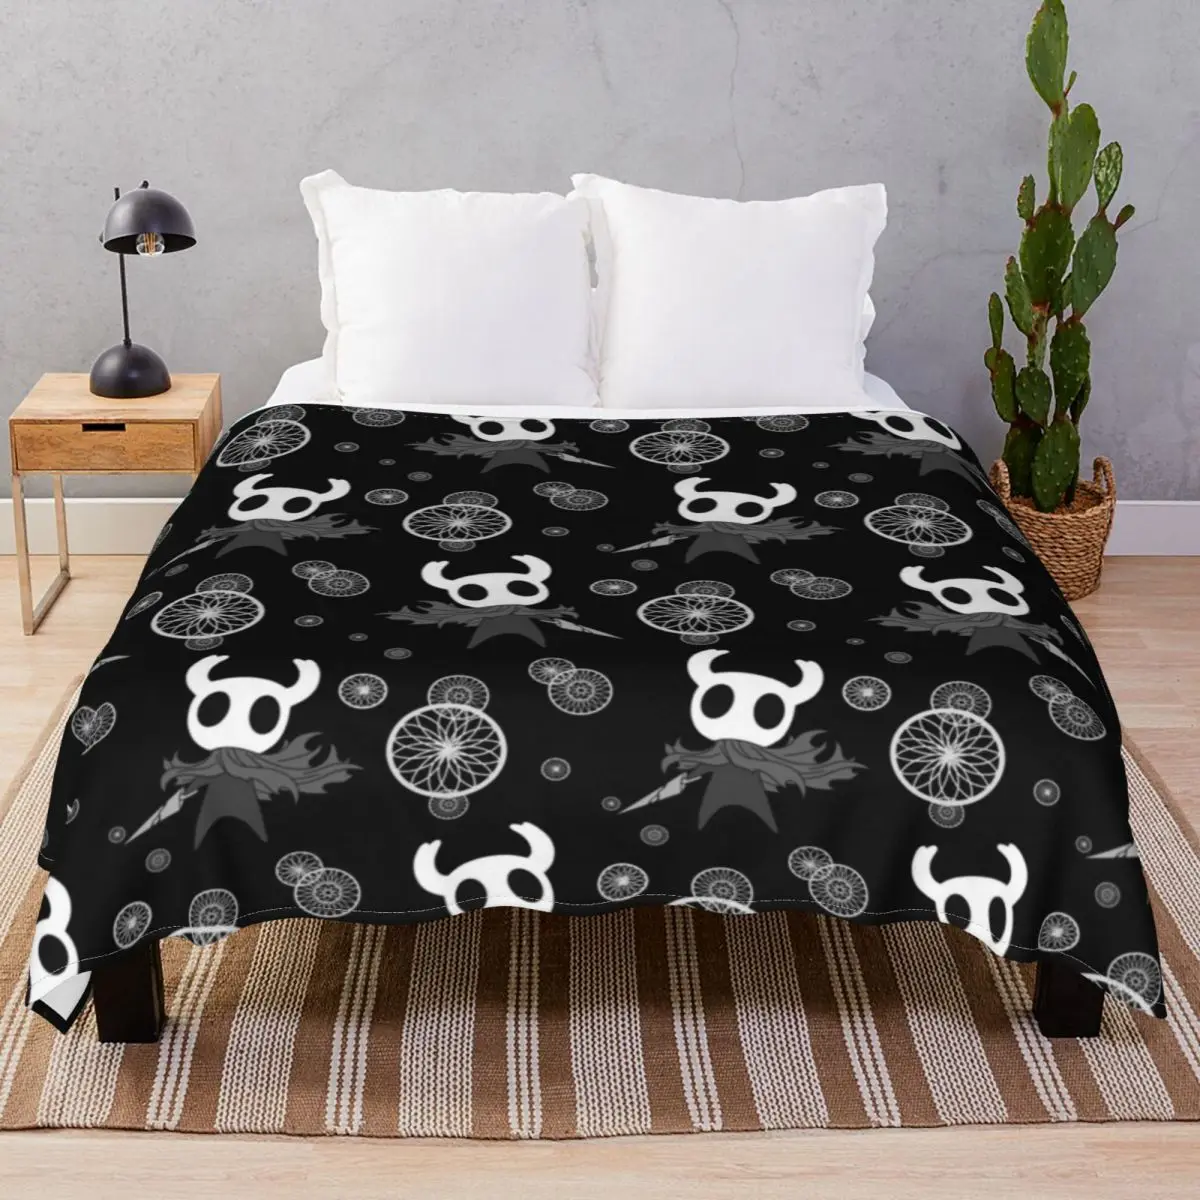 Hollow Knight Pattern Blanket Velvet Winter Multifunction Throw Blankets for Bedding Home Couch Travel Office